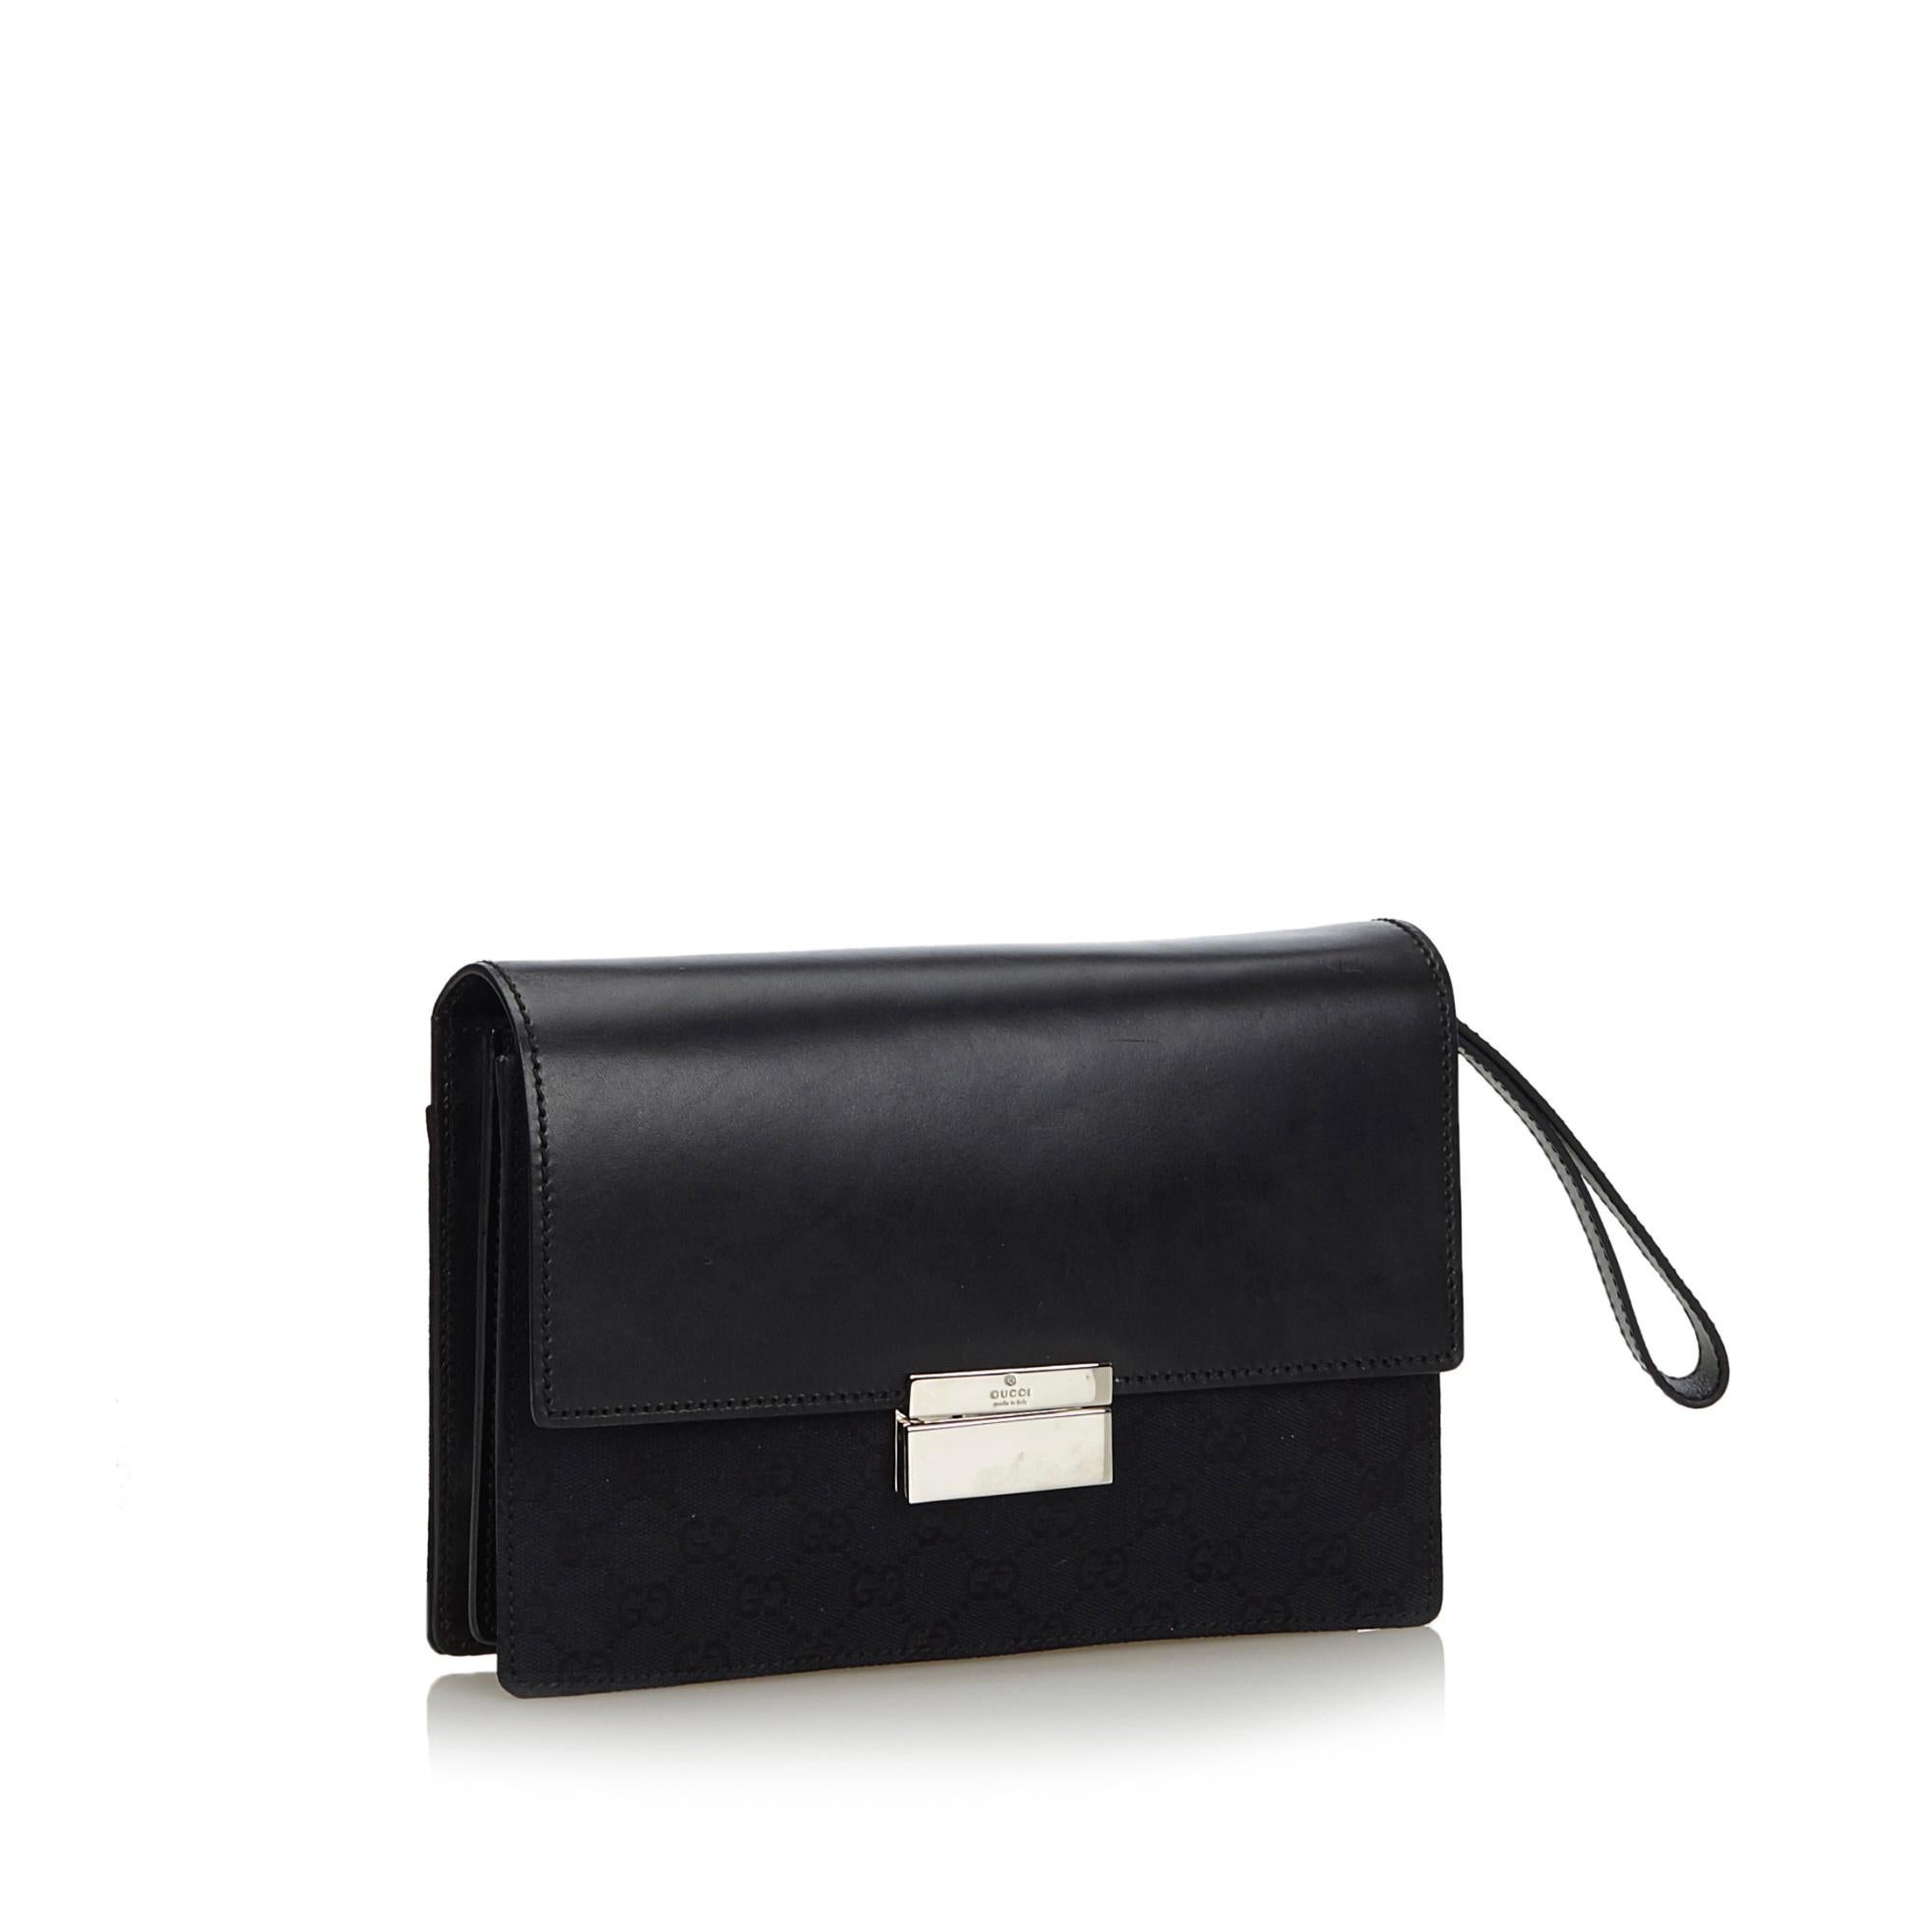 This clutch bag features a canvas body, a flat leather wrist strap, a front leather flap with a metal closure, and an interior zip pocket. It carries as AB condition rating.

Inclusions: 
Dust Bag

Dimensions:
Length: 18.00 cm
Width: 26.00 cm
Depth: